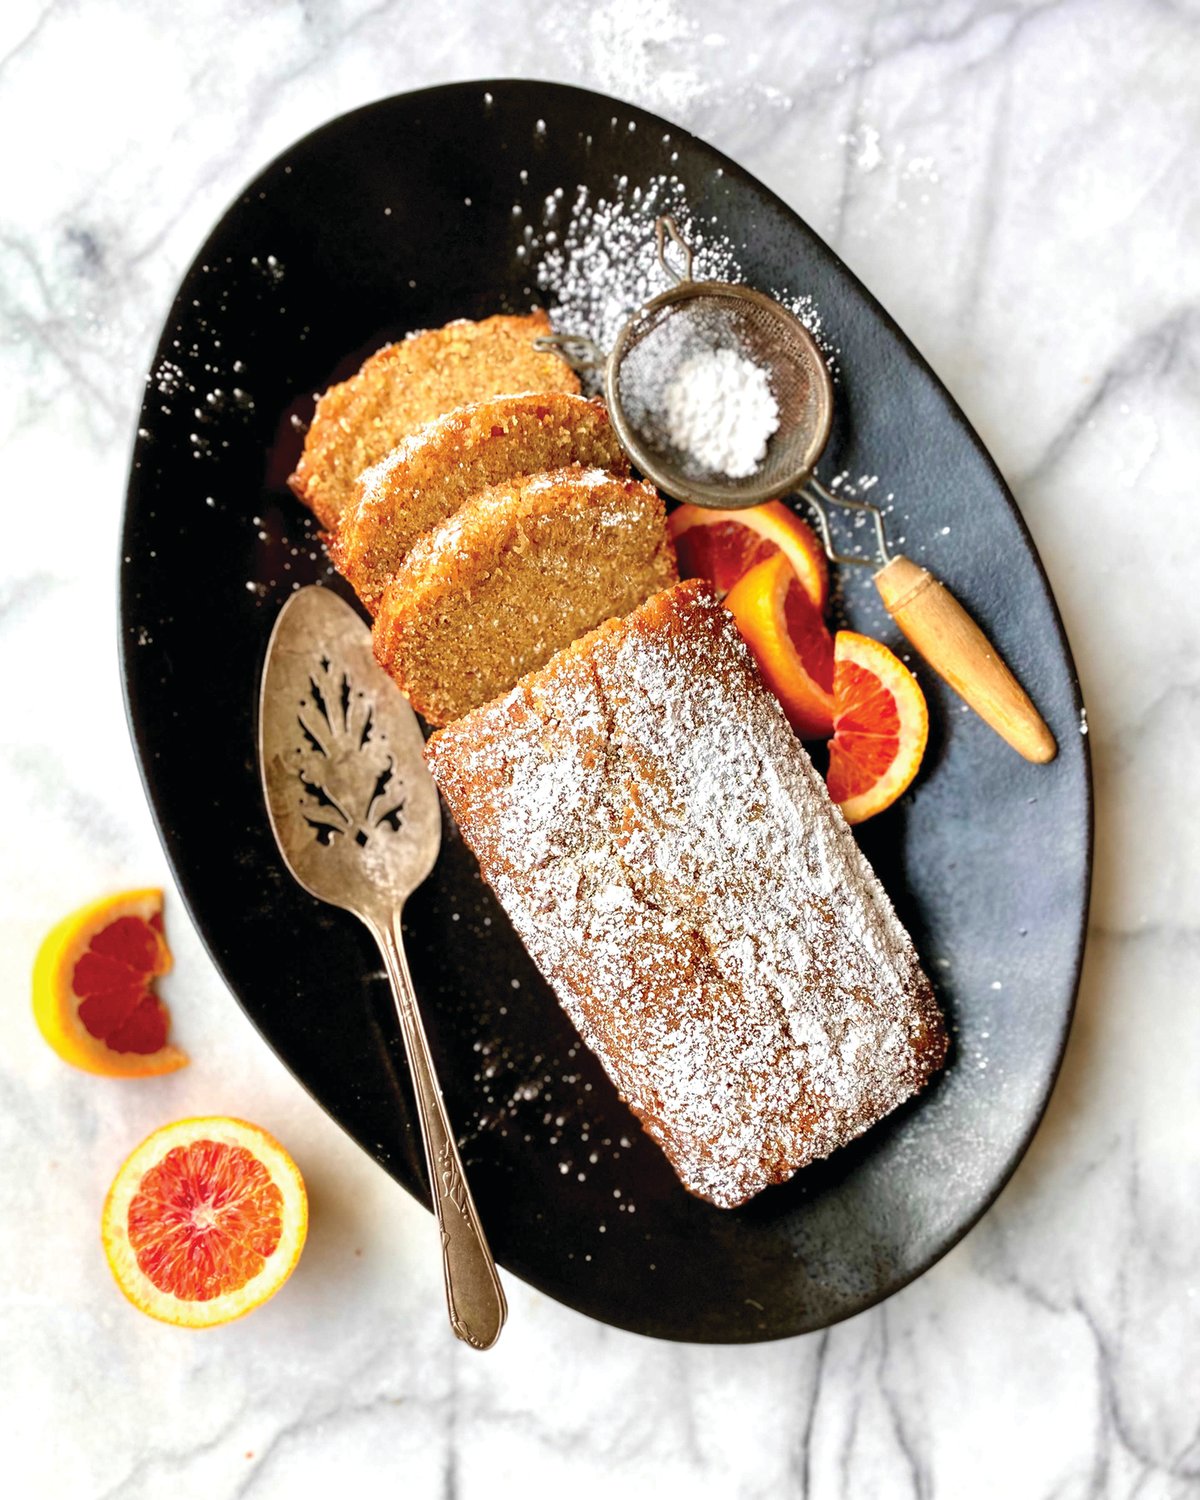 This recipe celebrates the end of the blood orange season. Any citrus is delicious in a pound cake, which is a natural canvas for the spark of citrus.